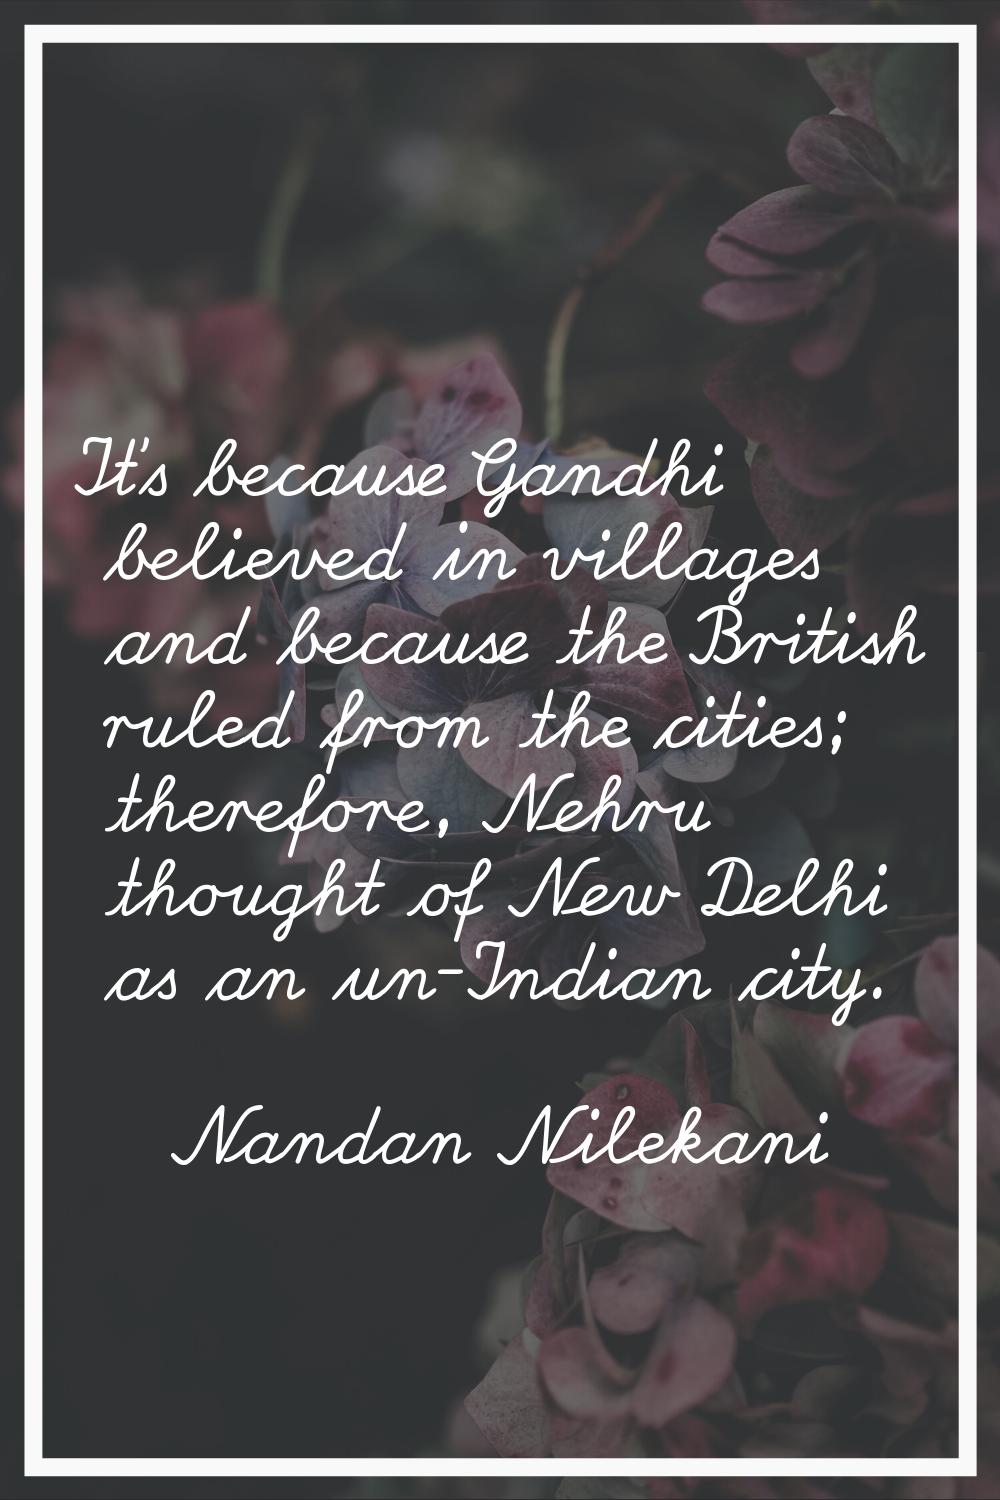 It's because Gandhi believed in villages and because the British ruled from the cities; therefore, 